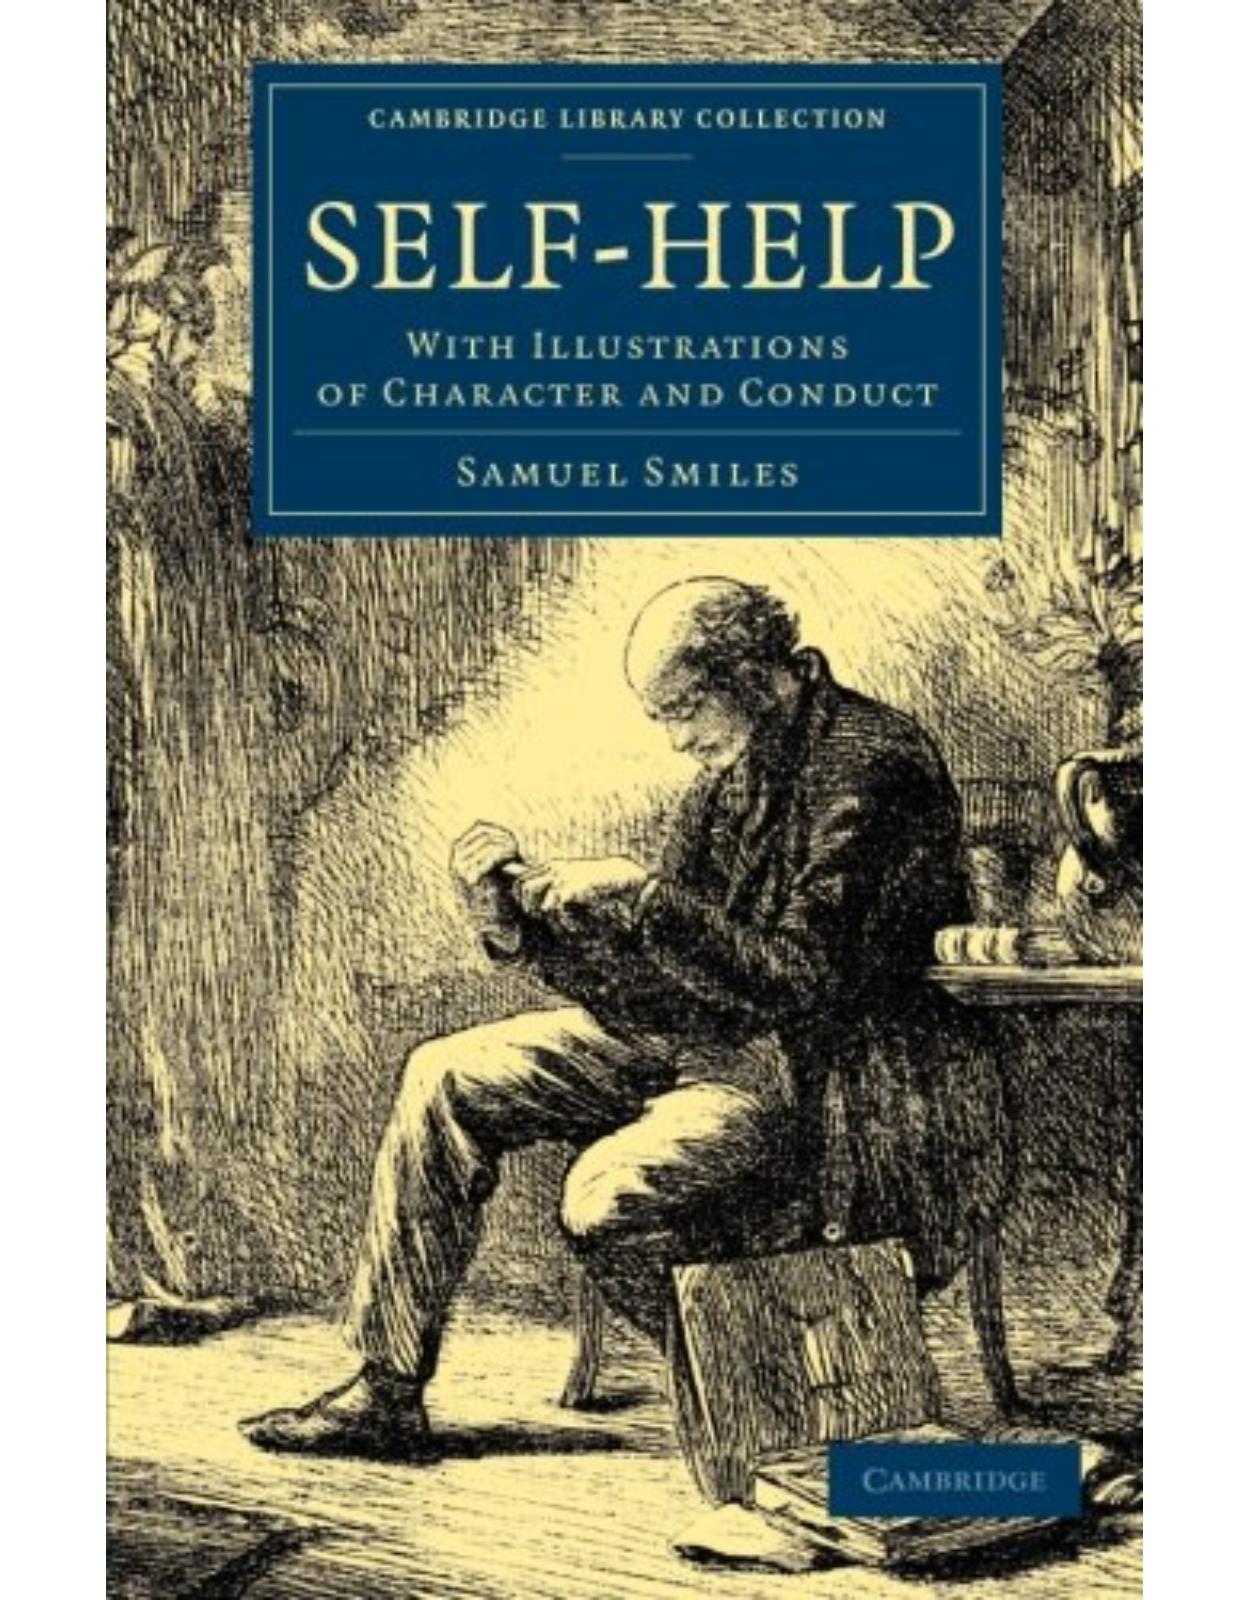 Self-Help: With Illustrations of Character and Conduct (Cambridge Library Collection - British and Irish History, 19th Century)